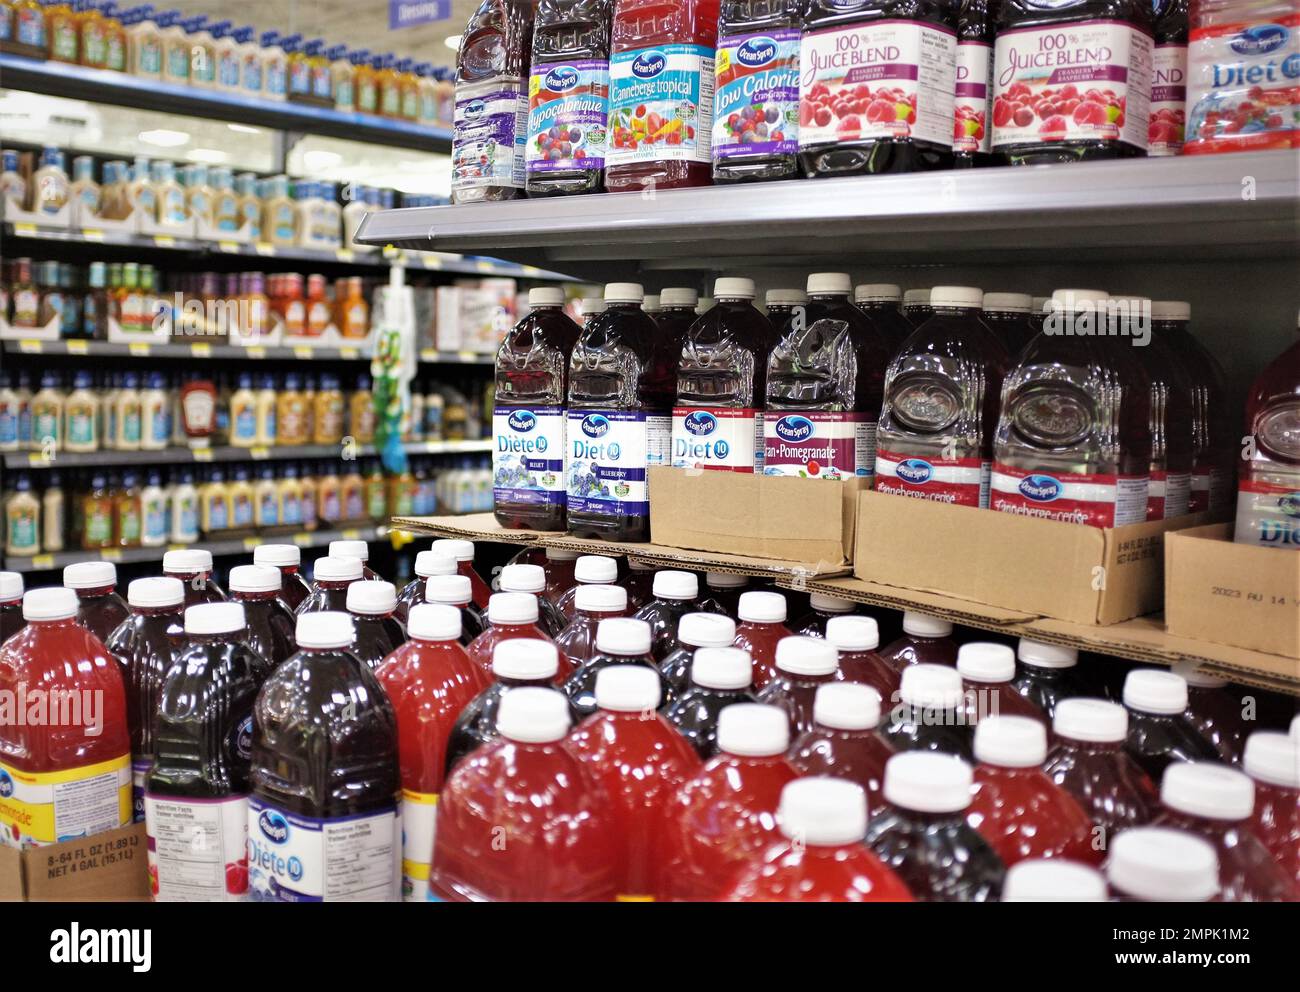 Juices bottles and canned food aisles at a Walmart store in Canada. Stock Photo